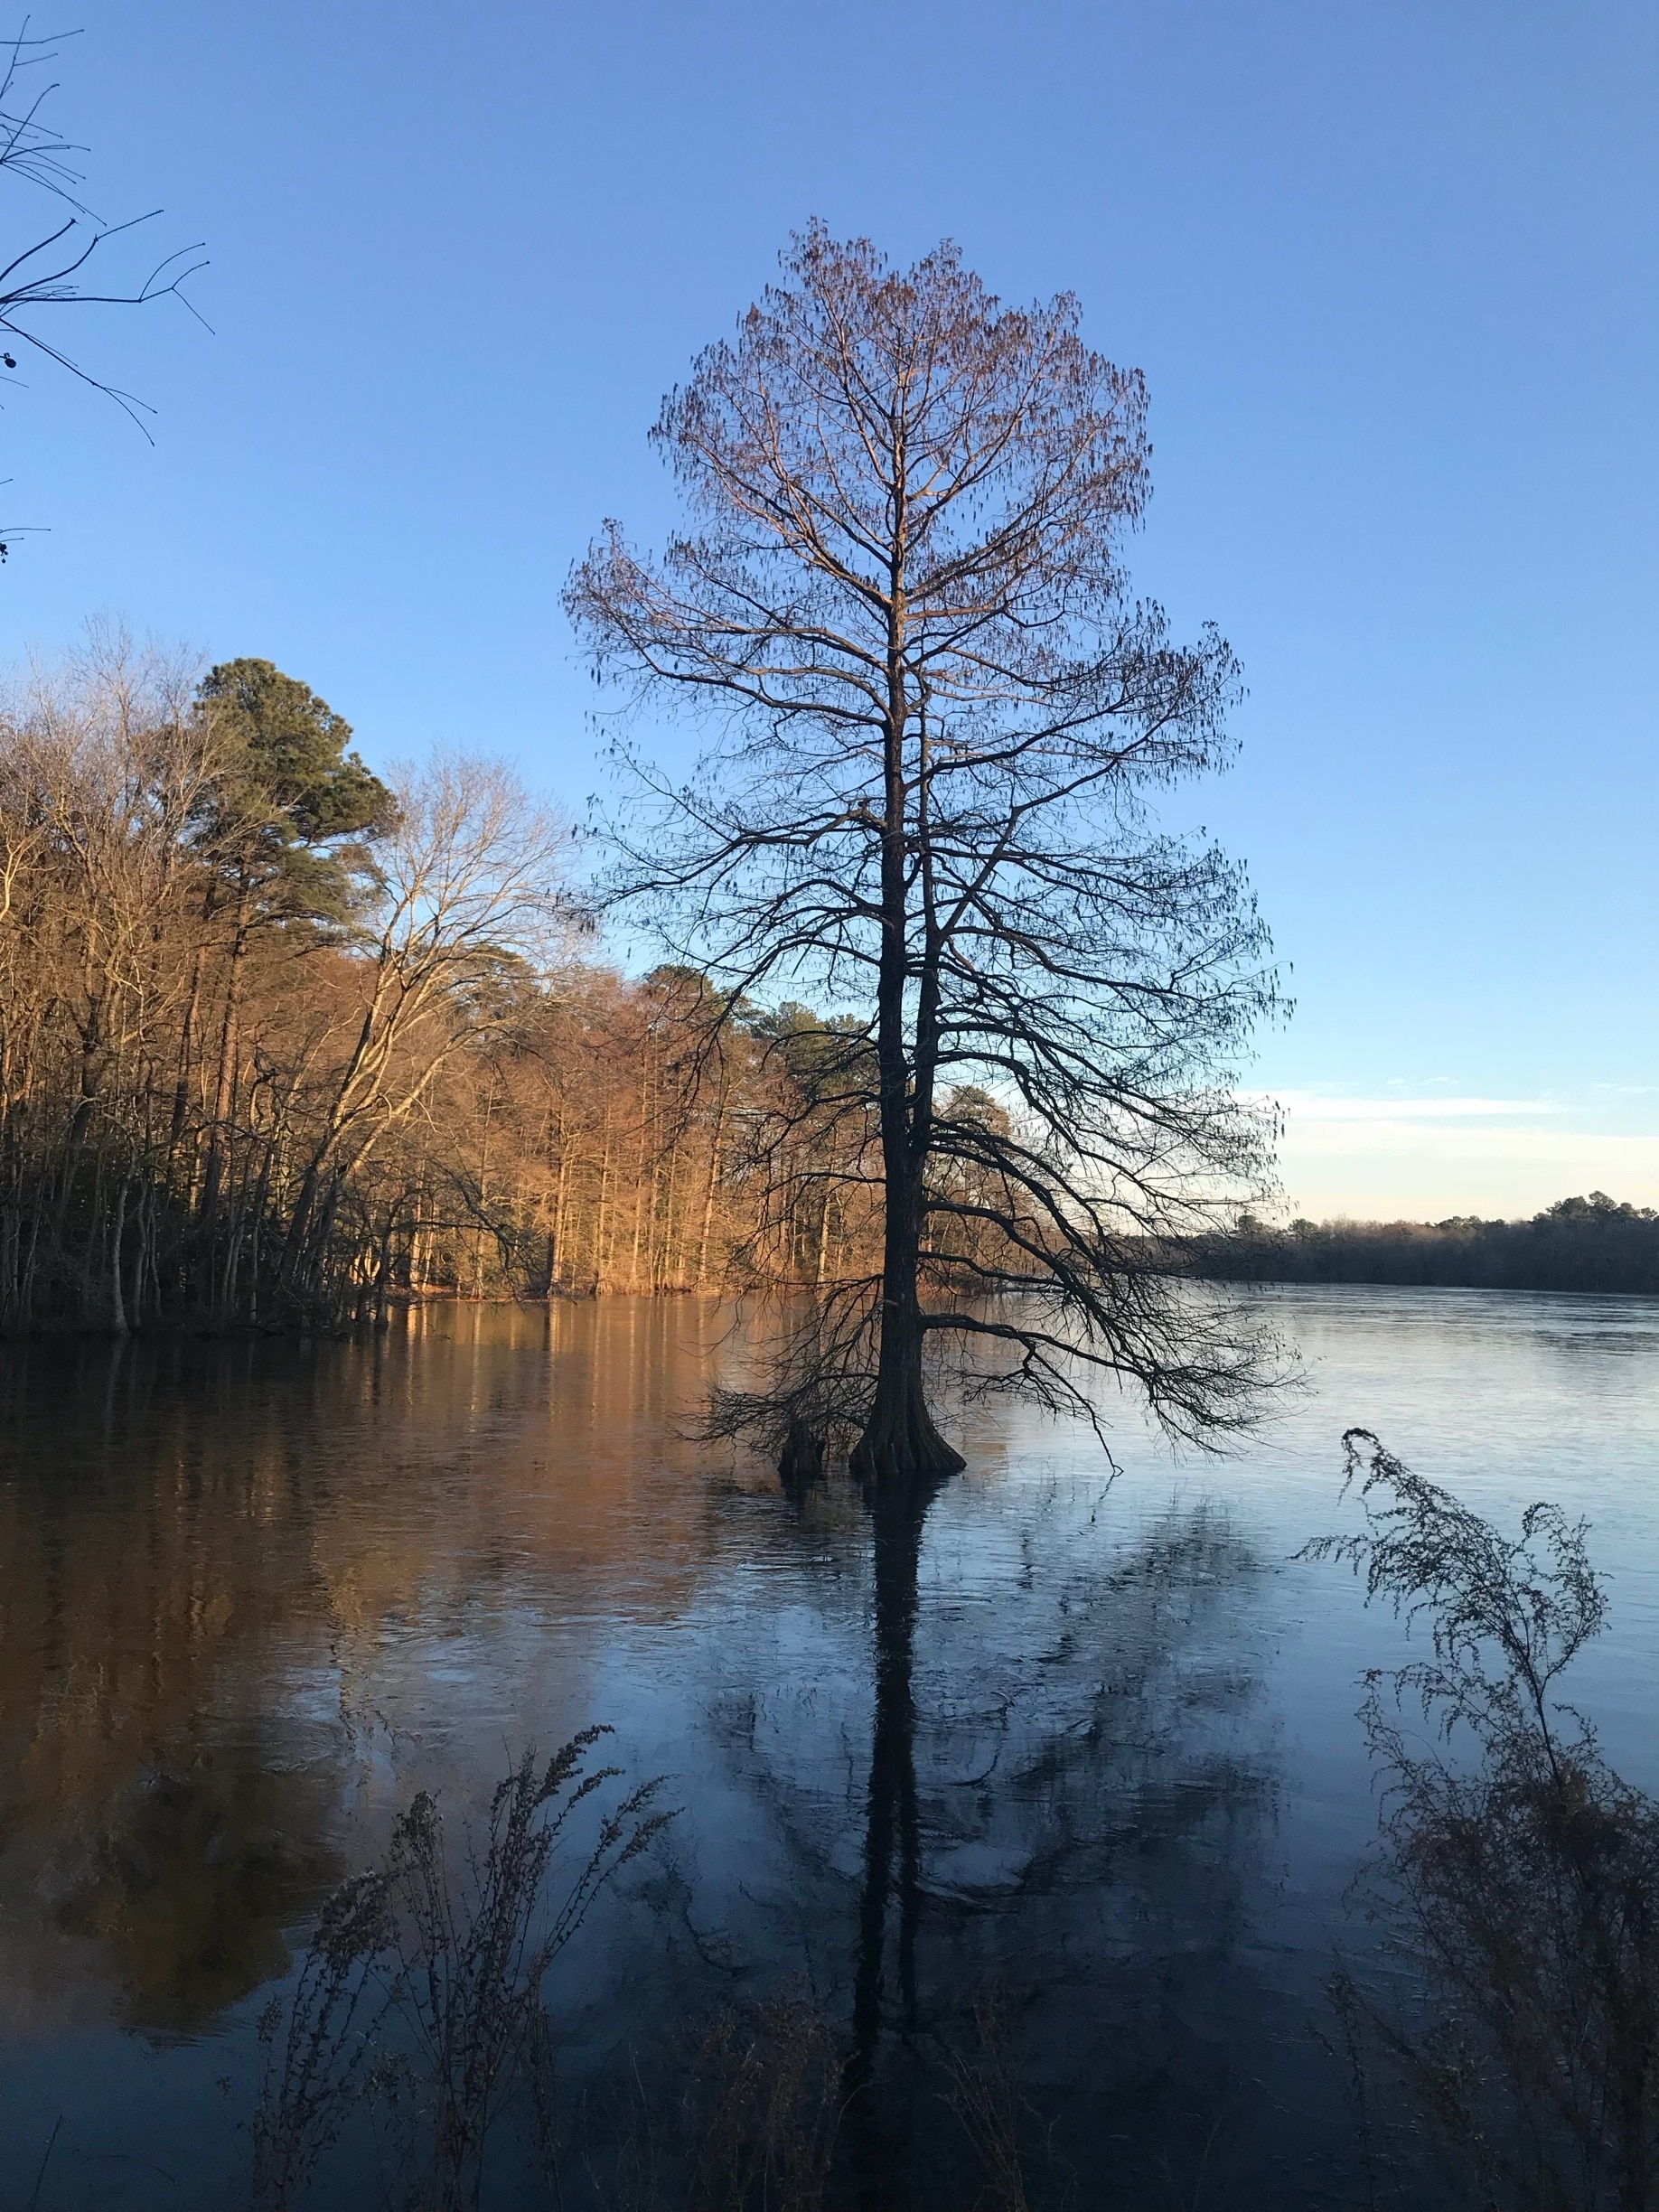 Trap Pond State Park is known as the northernmost park in North America for cypress and bald cypress trees. No matter the season, this place is always a gem. Today the pond was starting to freeze around this cypress tree creating a gorgeous mosaic pattern. 